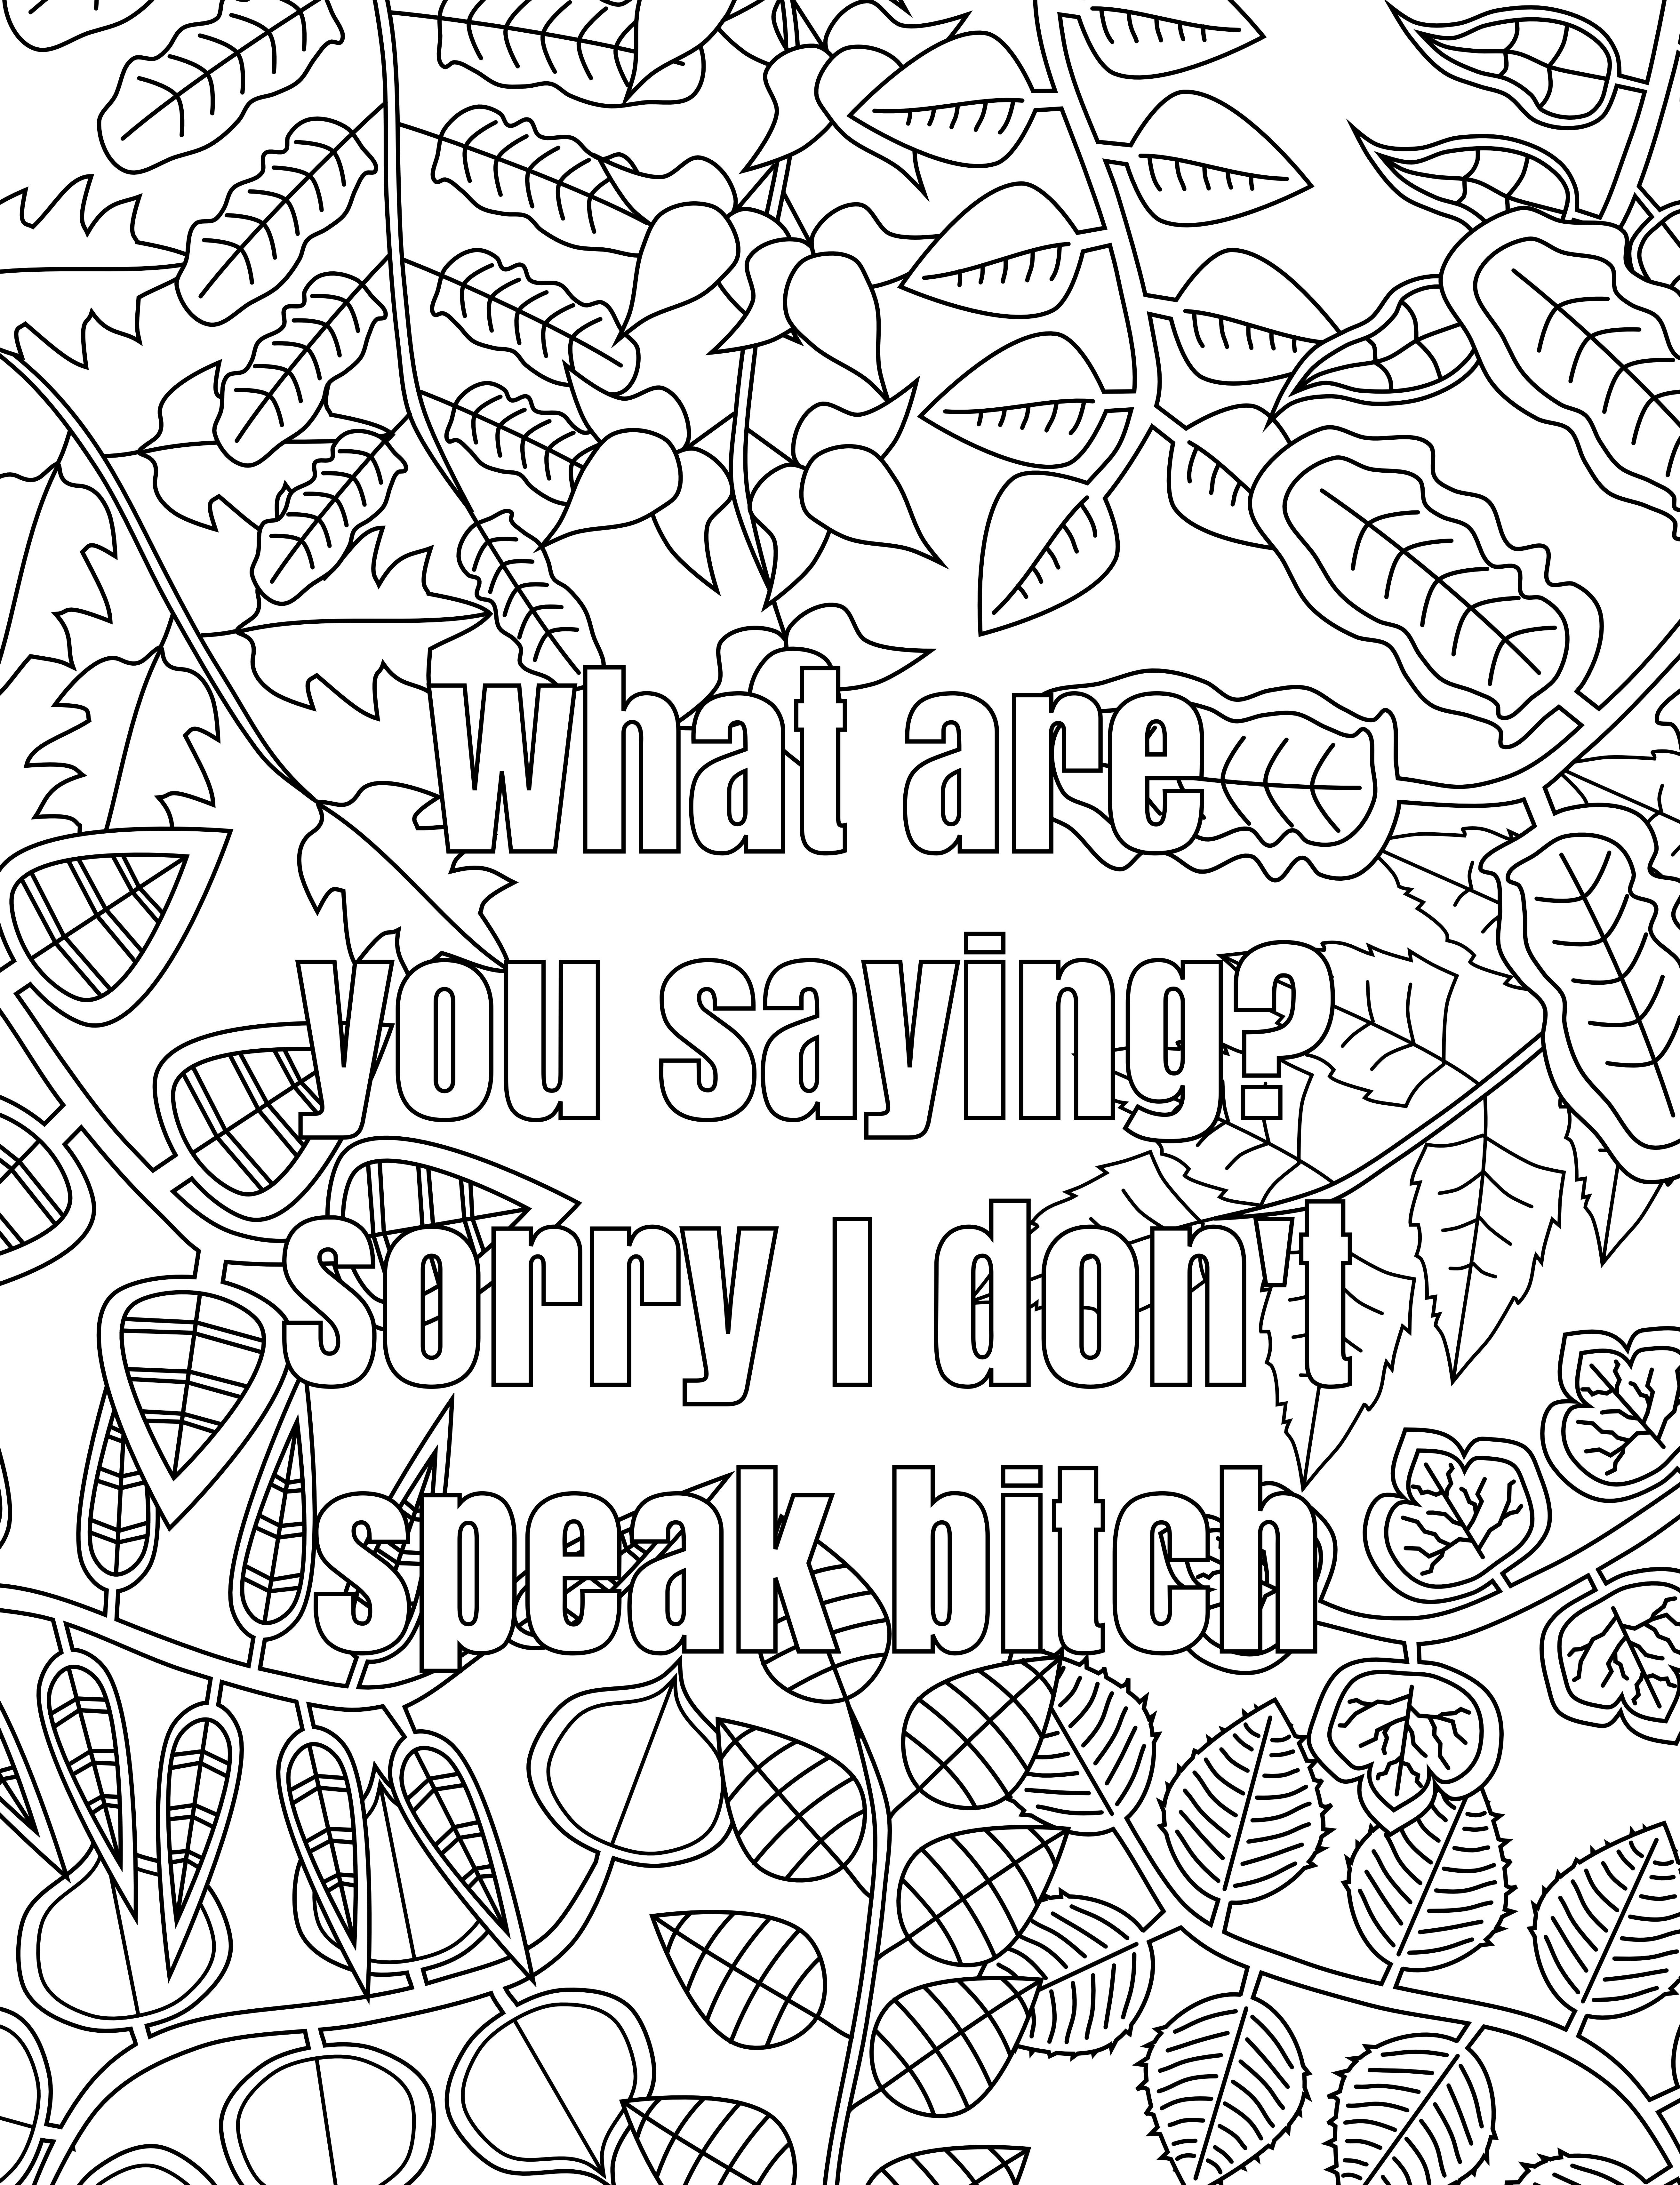 Free Printable Coloring Pages For Adults Only Swear Words ...